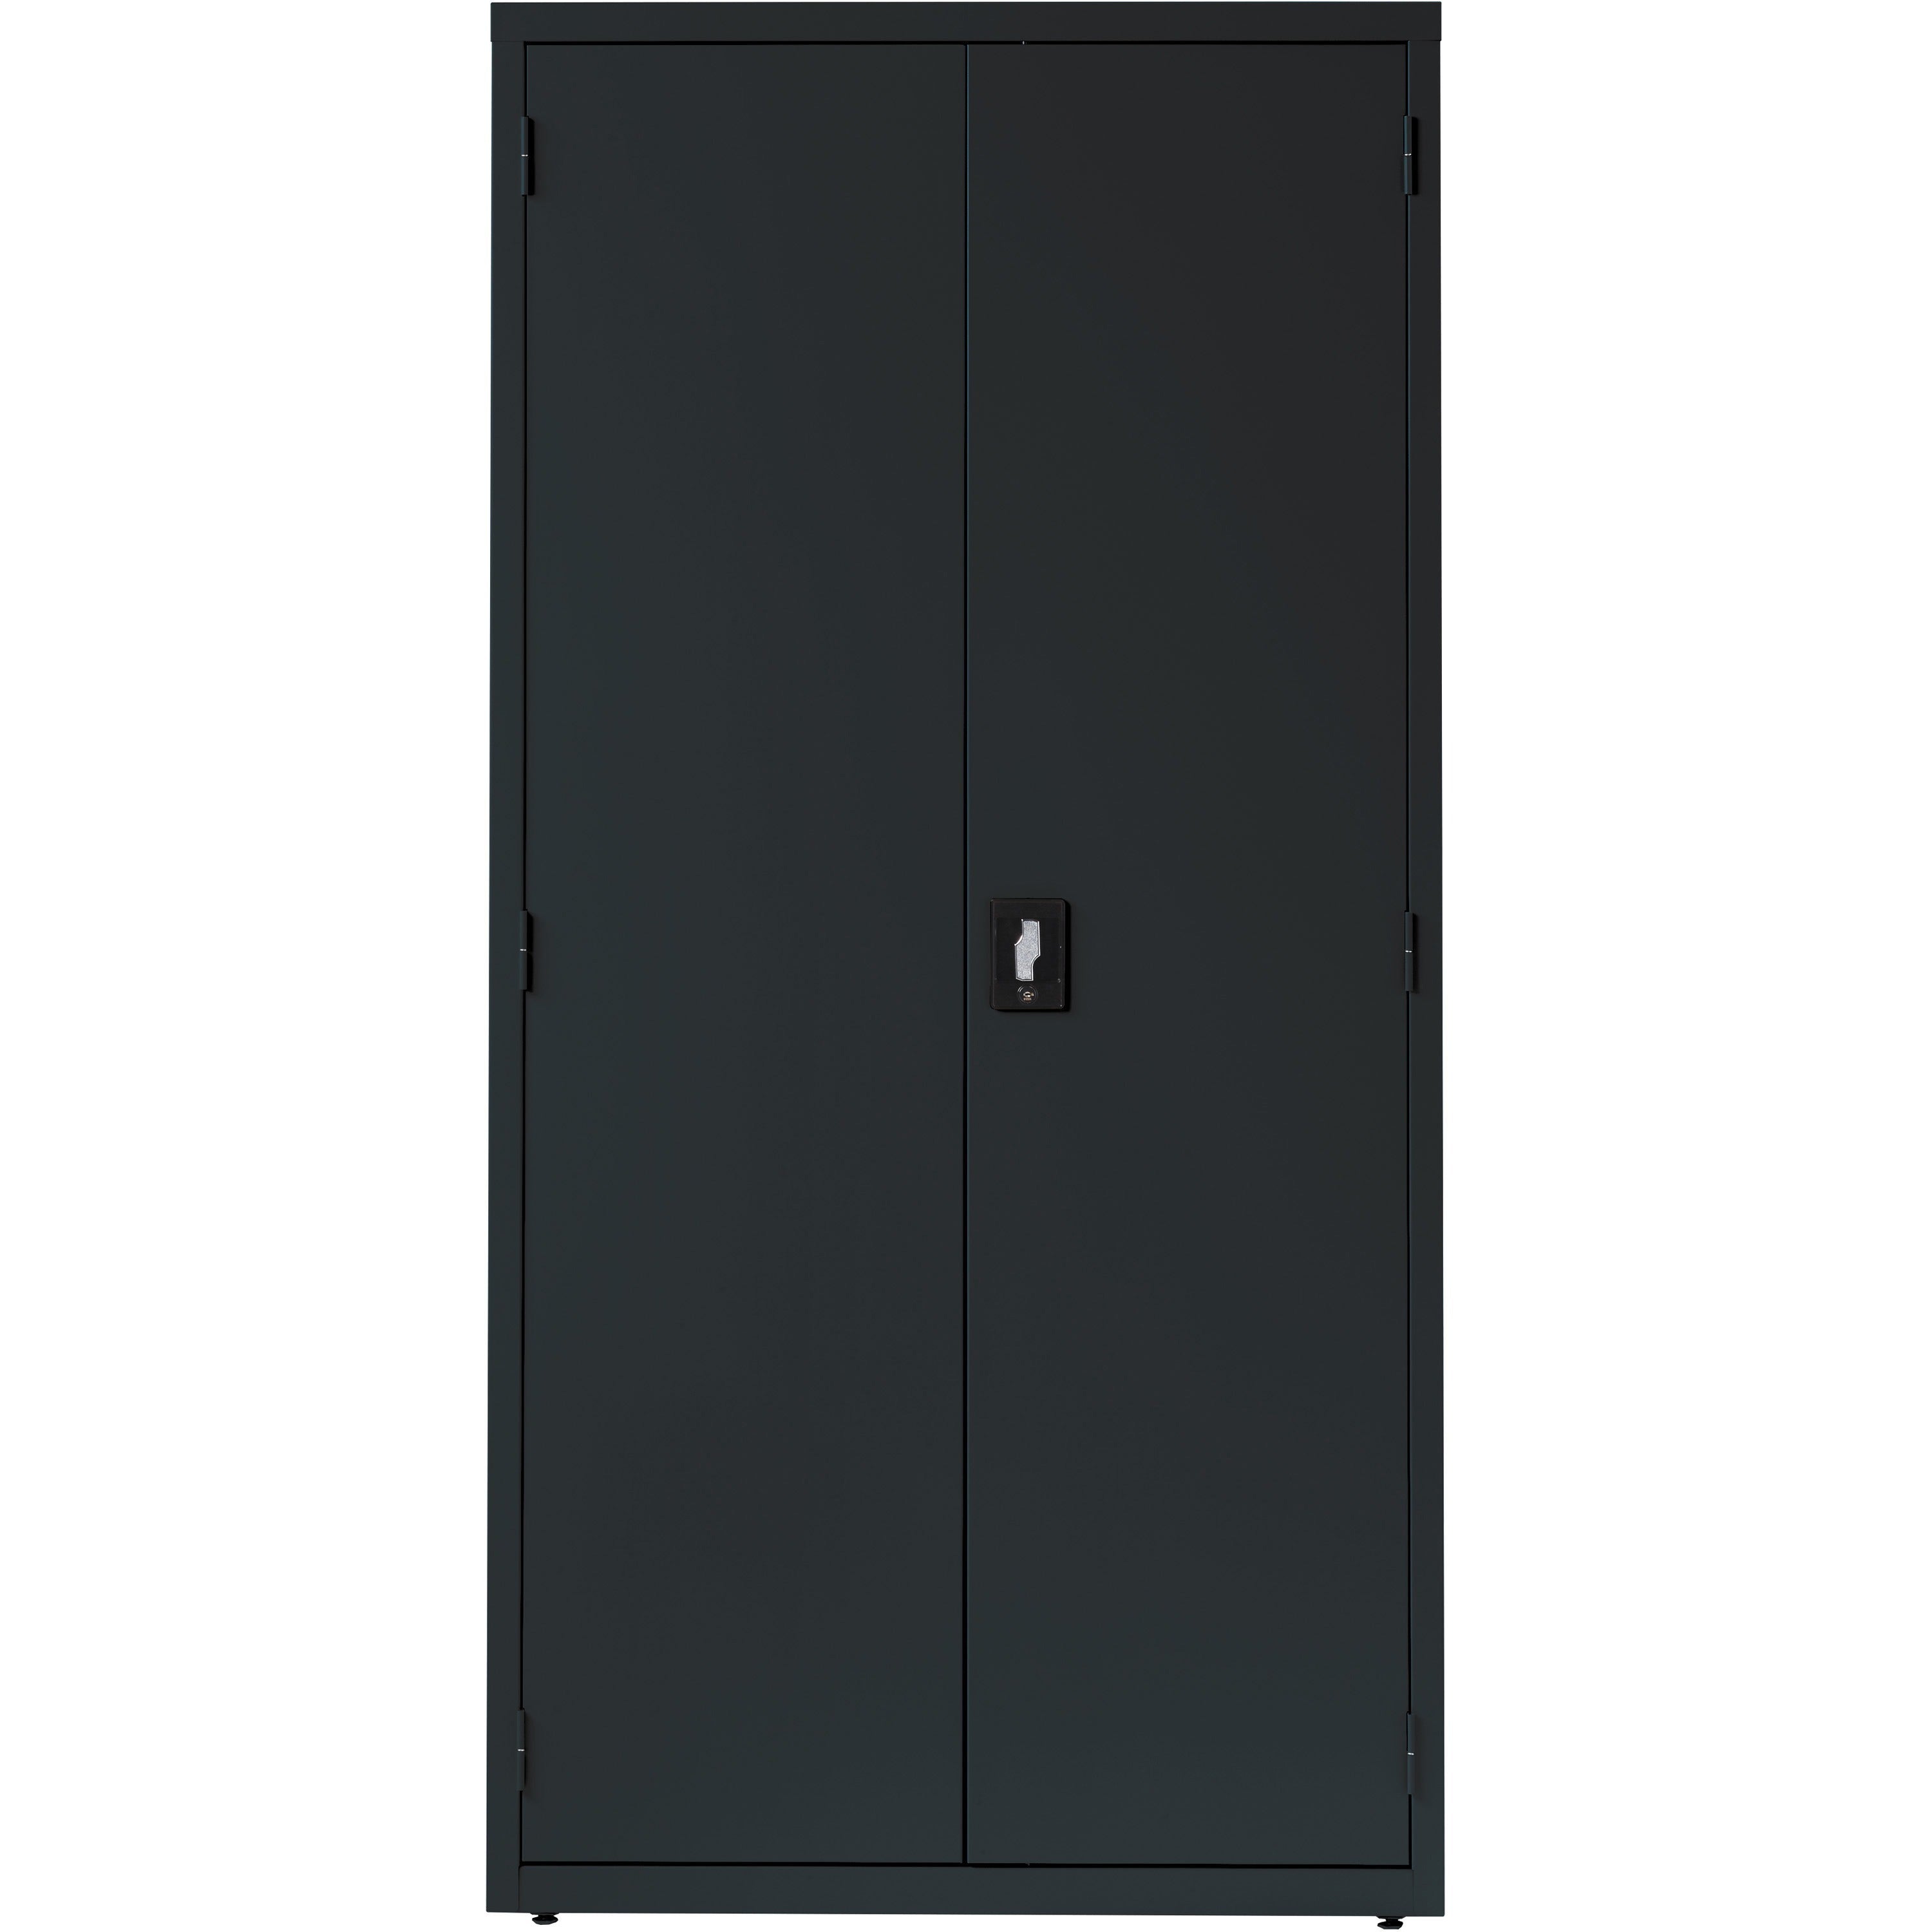 lorell-fortress-series-storage-cabinet-36-x-24-x-72-5-x-shelfves-hinged-doors-sturdy-recessed-locking-handle-removable-lock-durable-storage-space-black-powder-coated-steel-recycled_llr34410 - 2